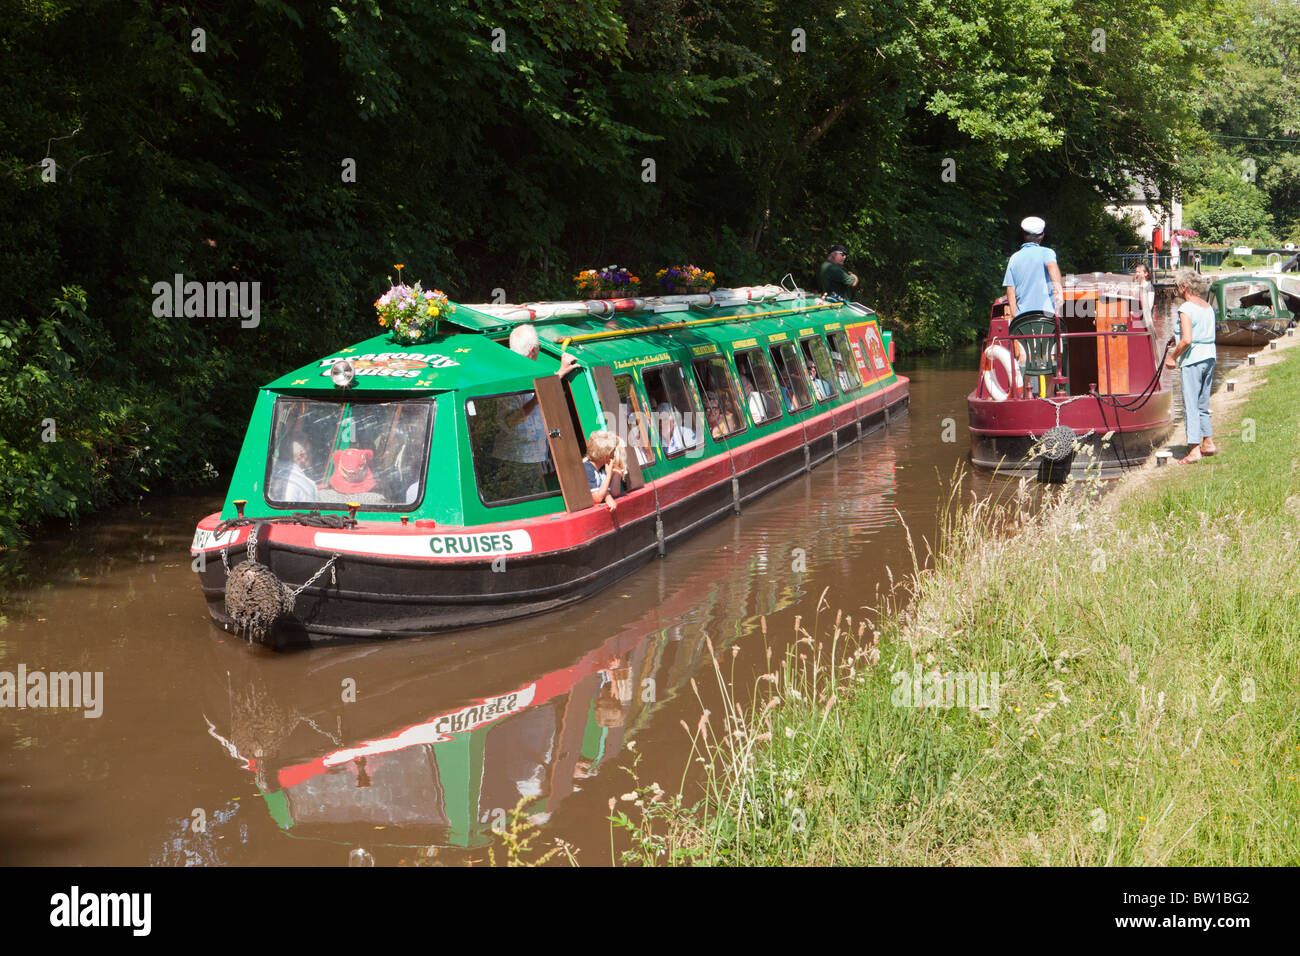 Tourists enjoying a ride on the Dragonfly Cruises canal trip boat on the Monmouthshire & Brecon Canal at Brecon, Powys, Wales Stock Photo